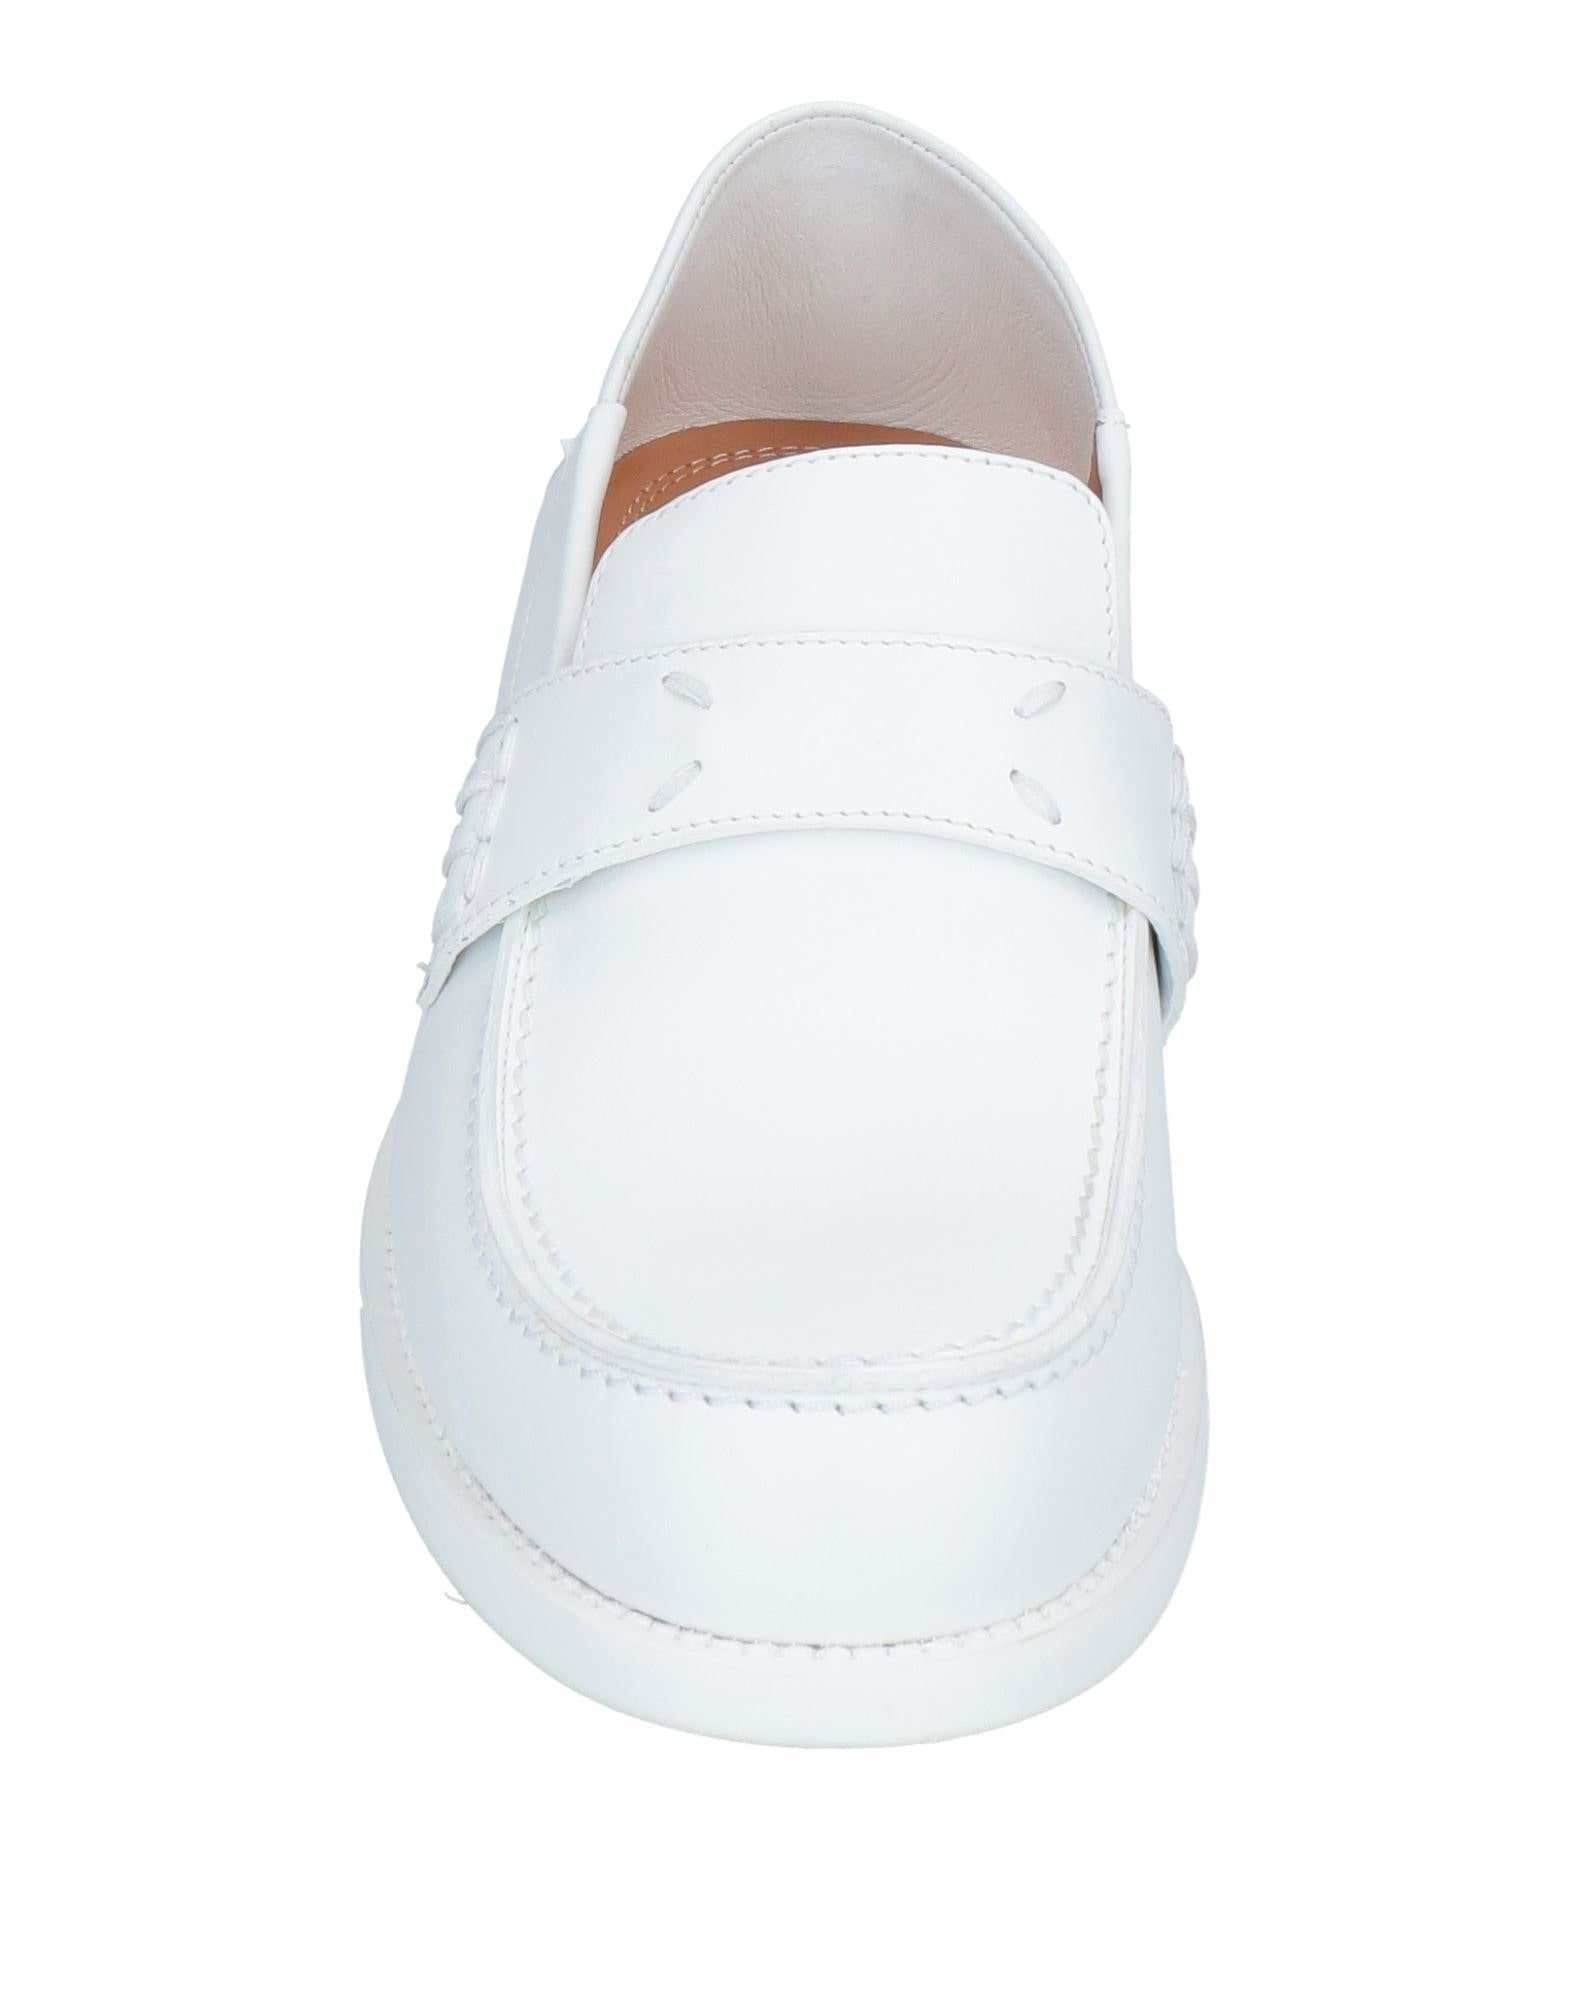 White Women's Loafers - 4